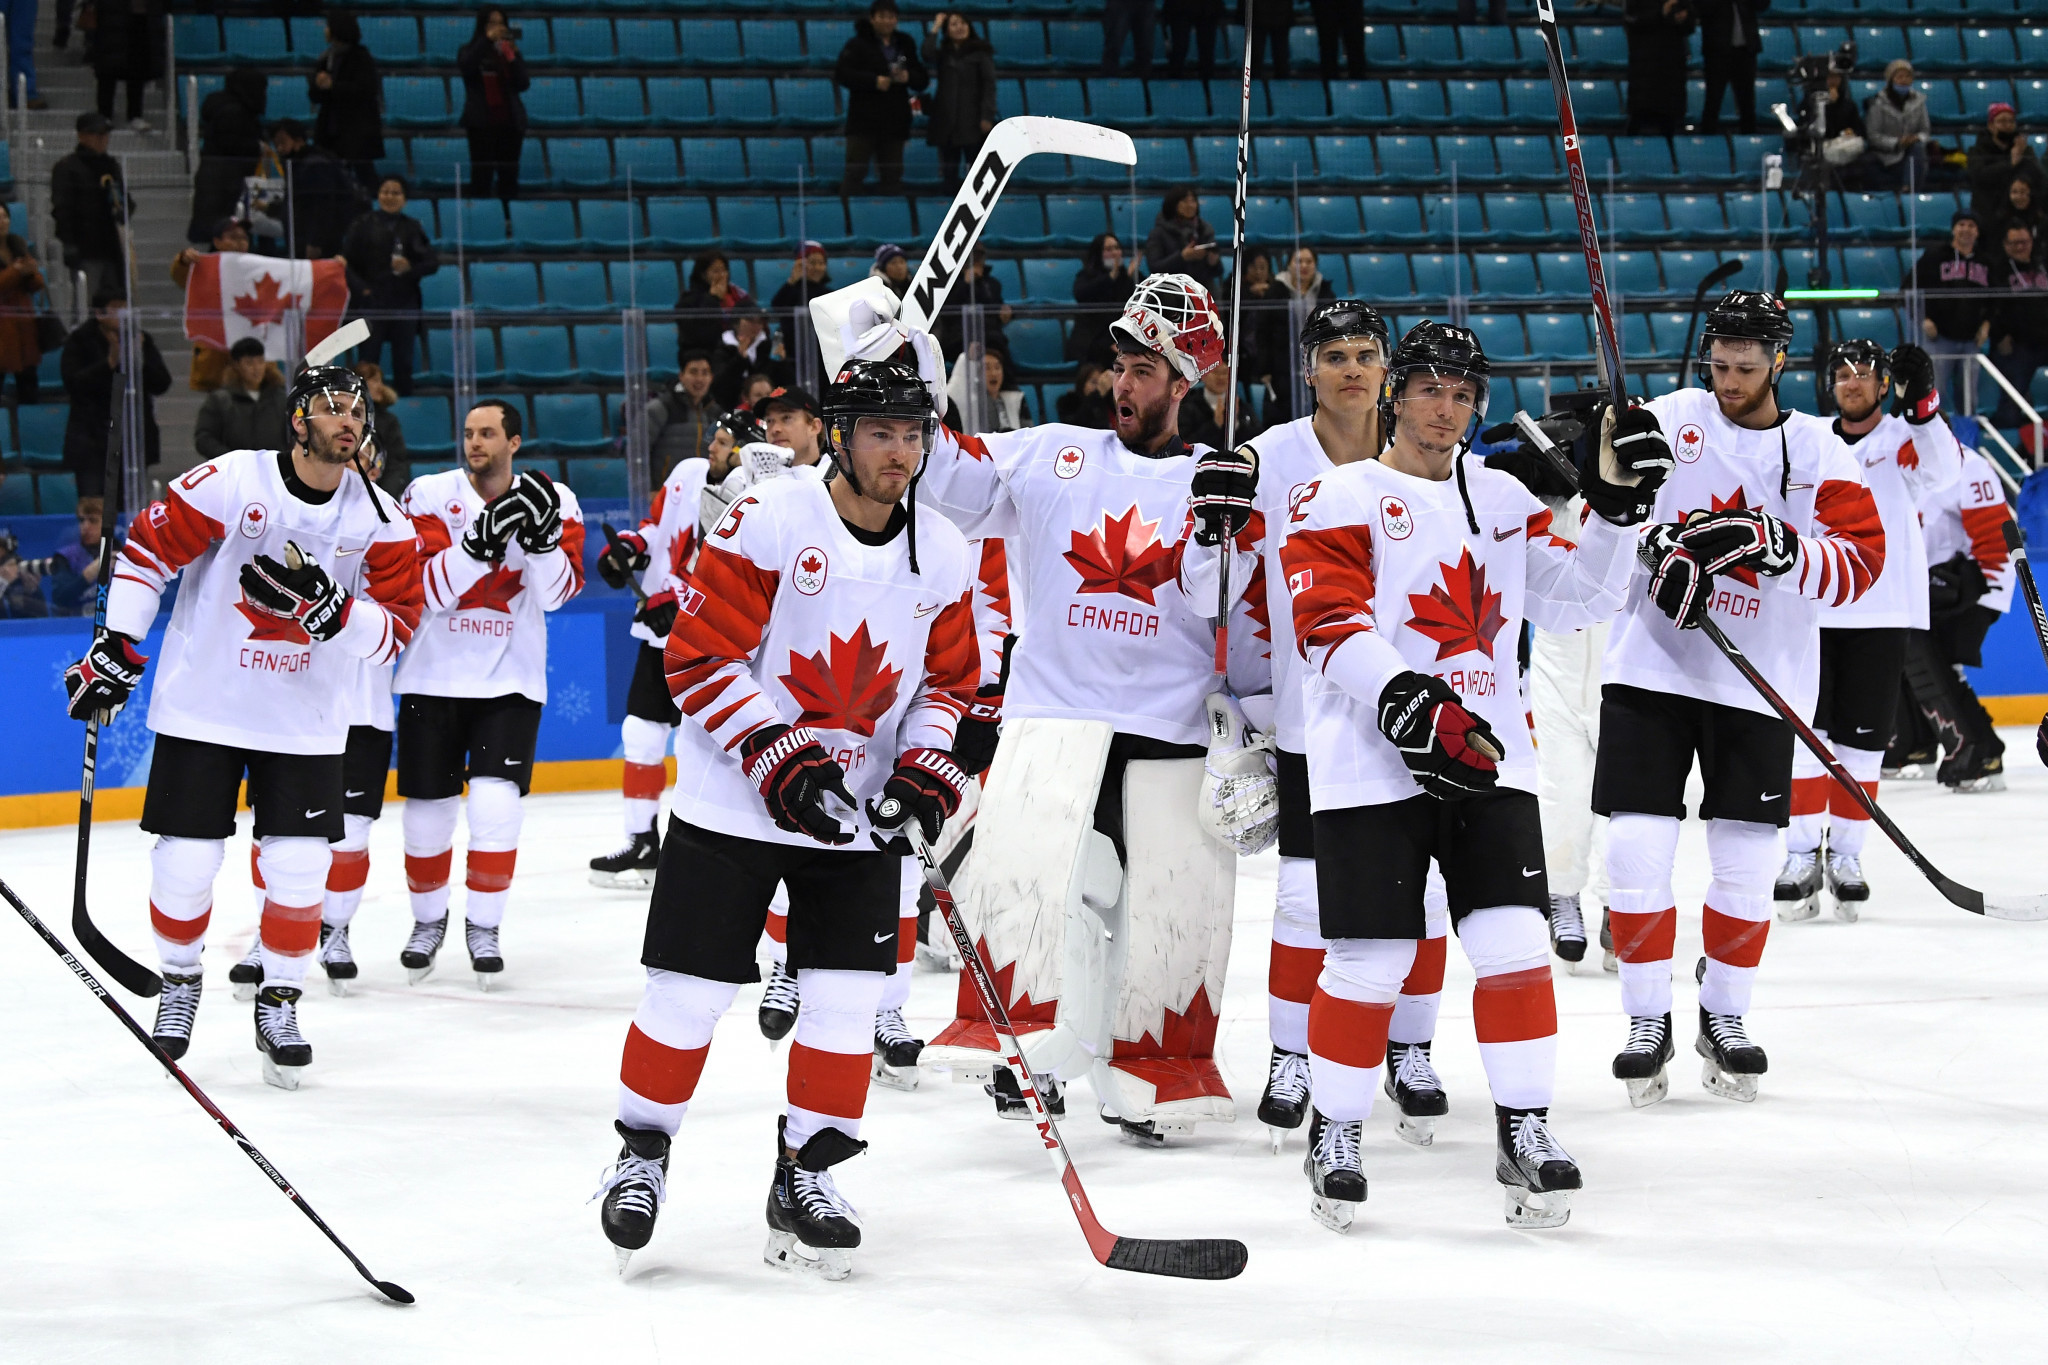 Single game tickets for IIHF World Junior Championships go on sale